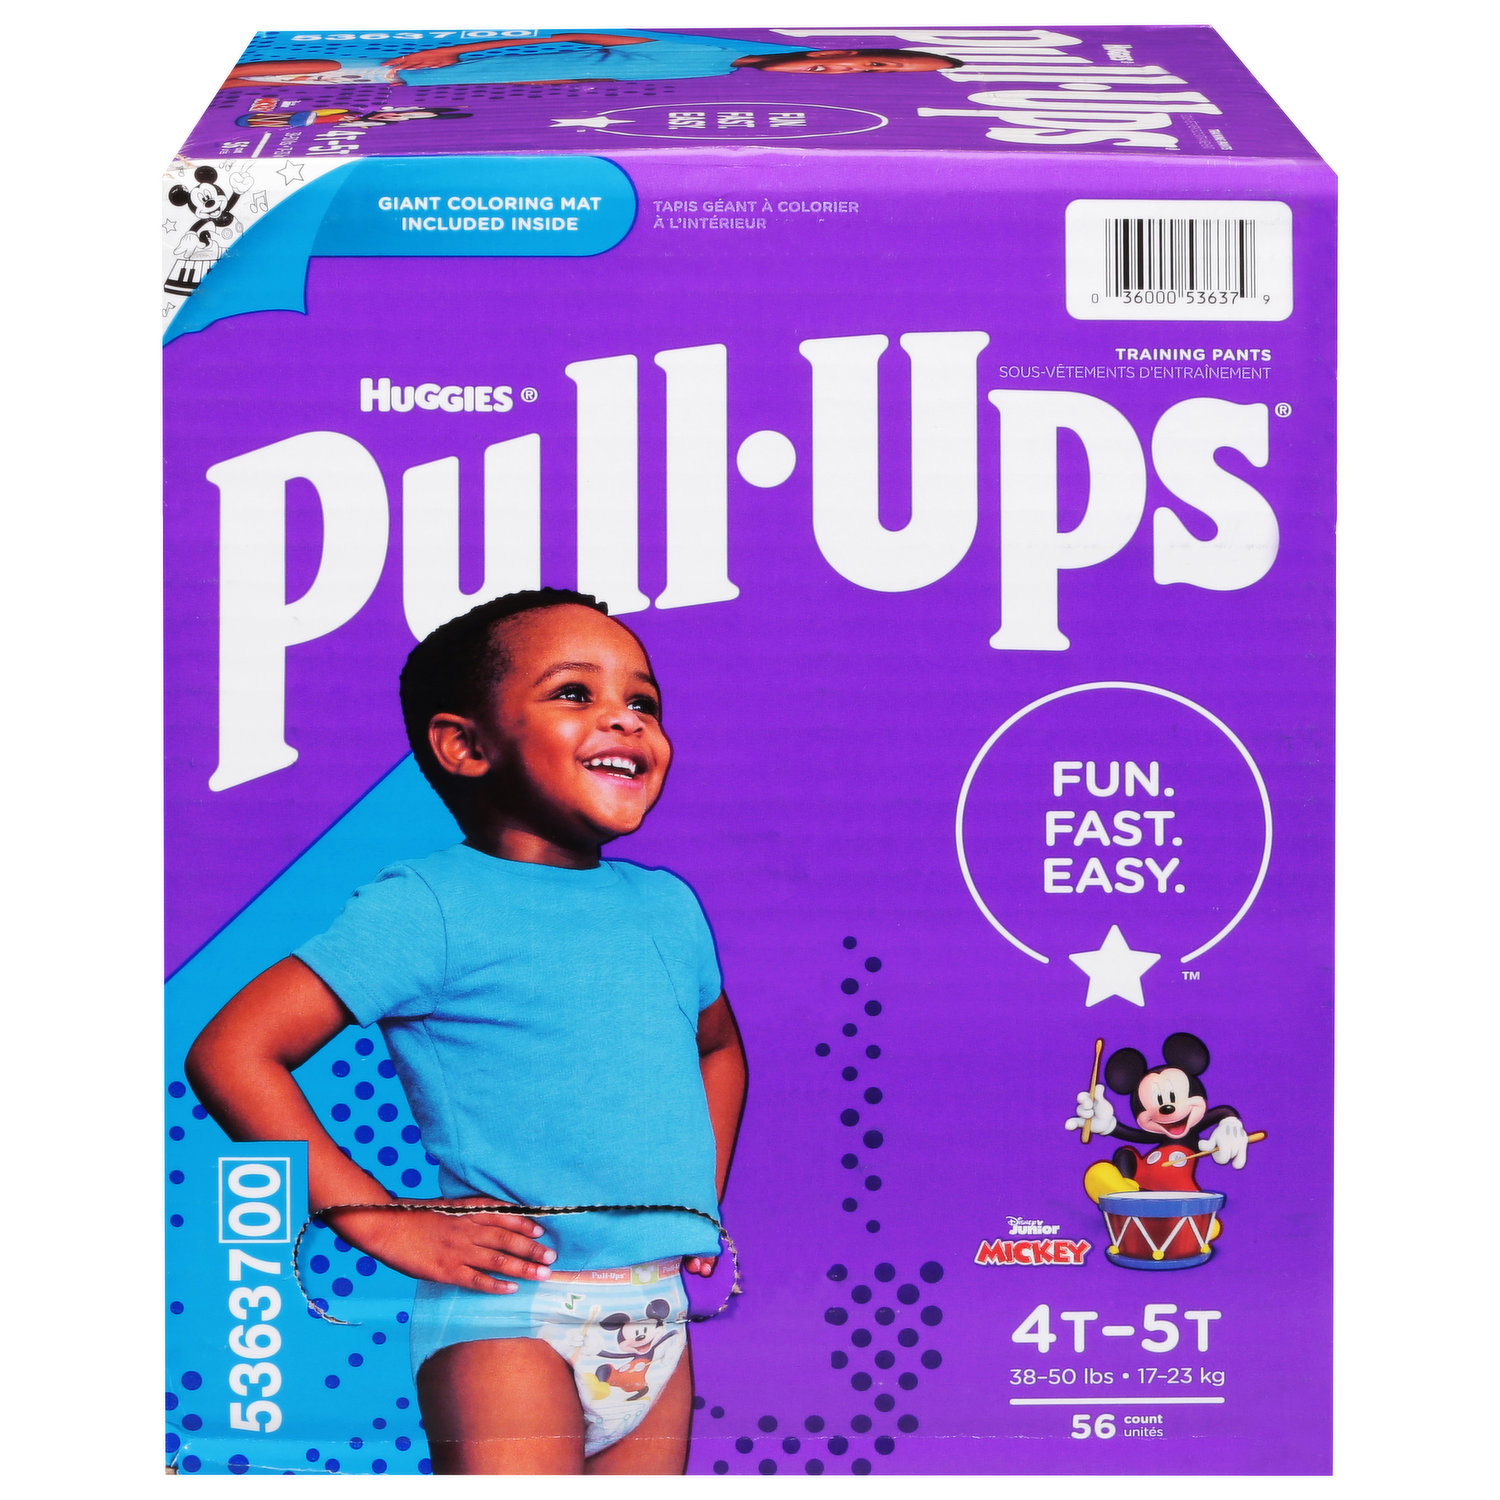 Pull-ups 4T-5T Boys Case 102ct Disney NEW - health and beauty - by owner -  household sale - craigslist